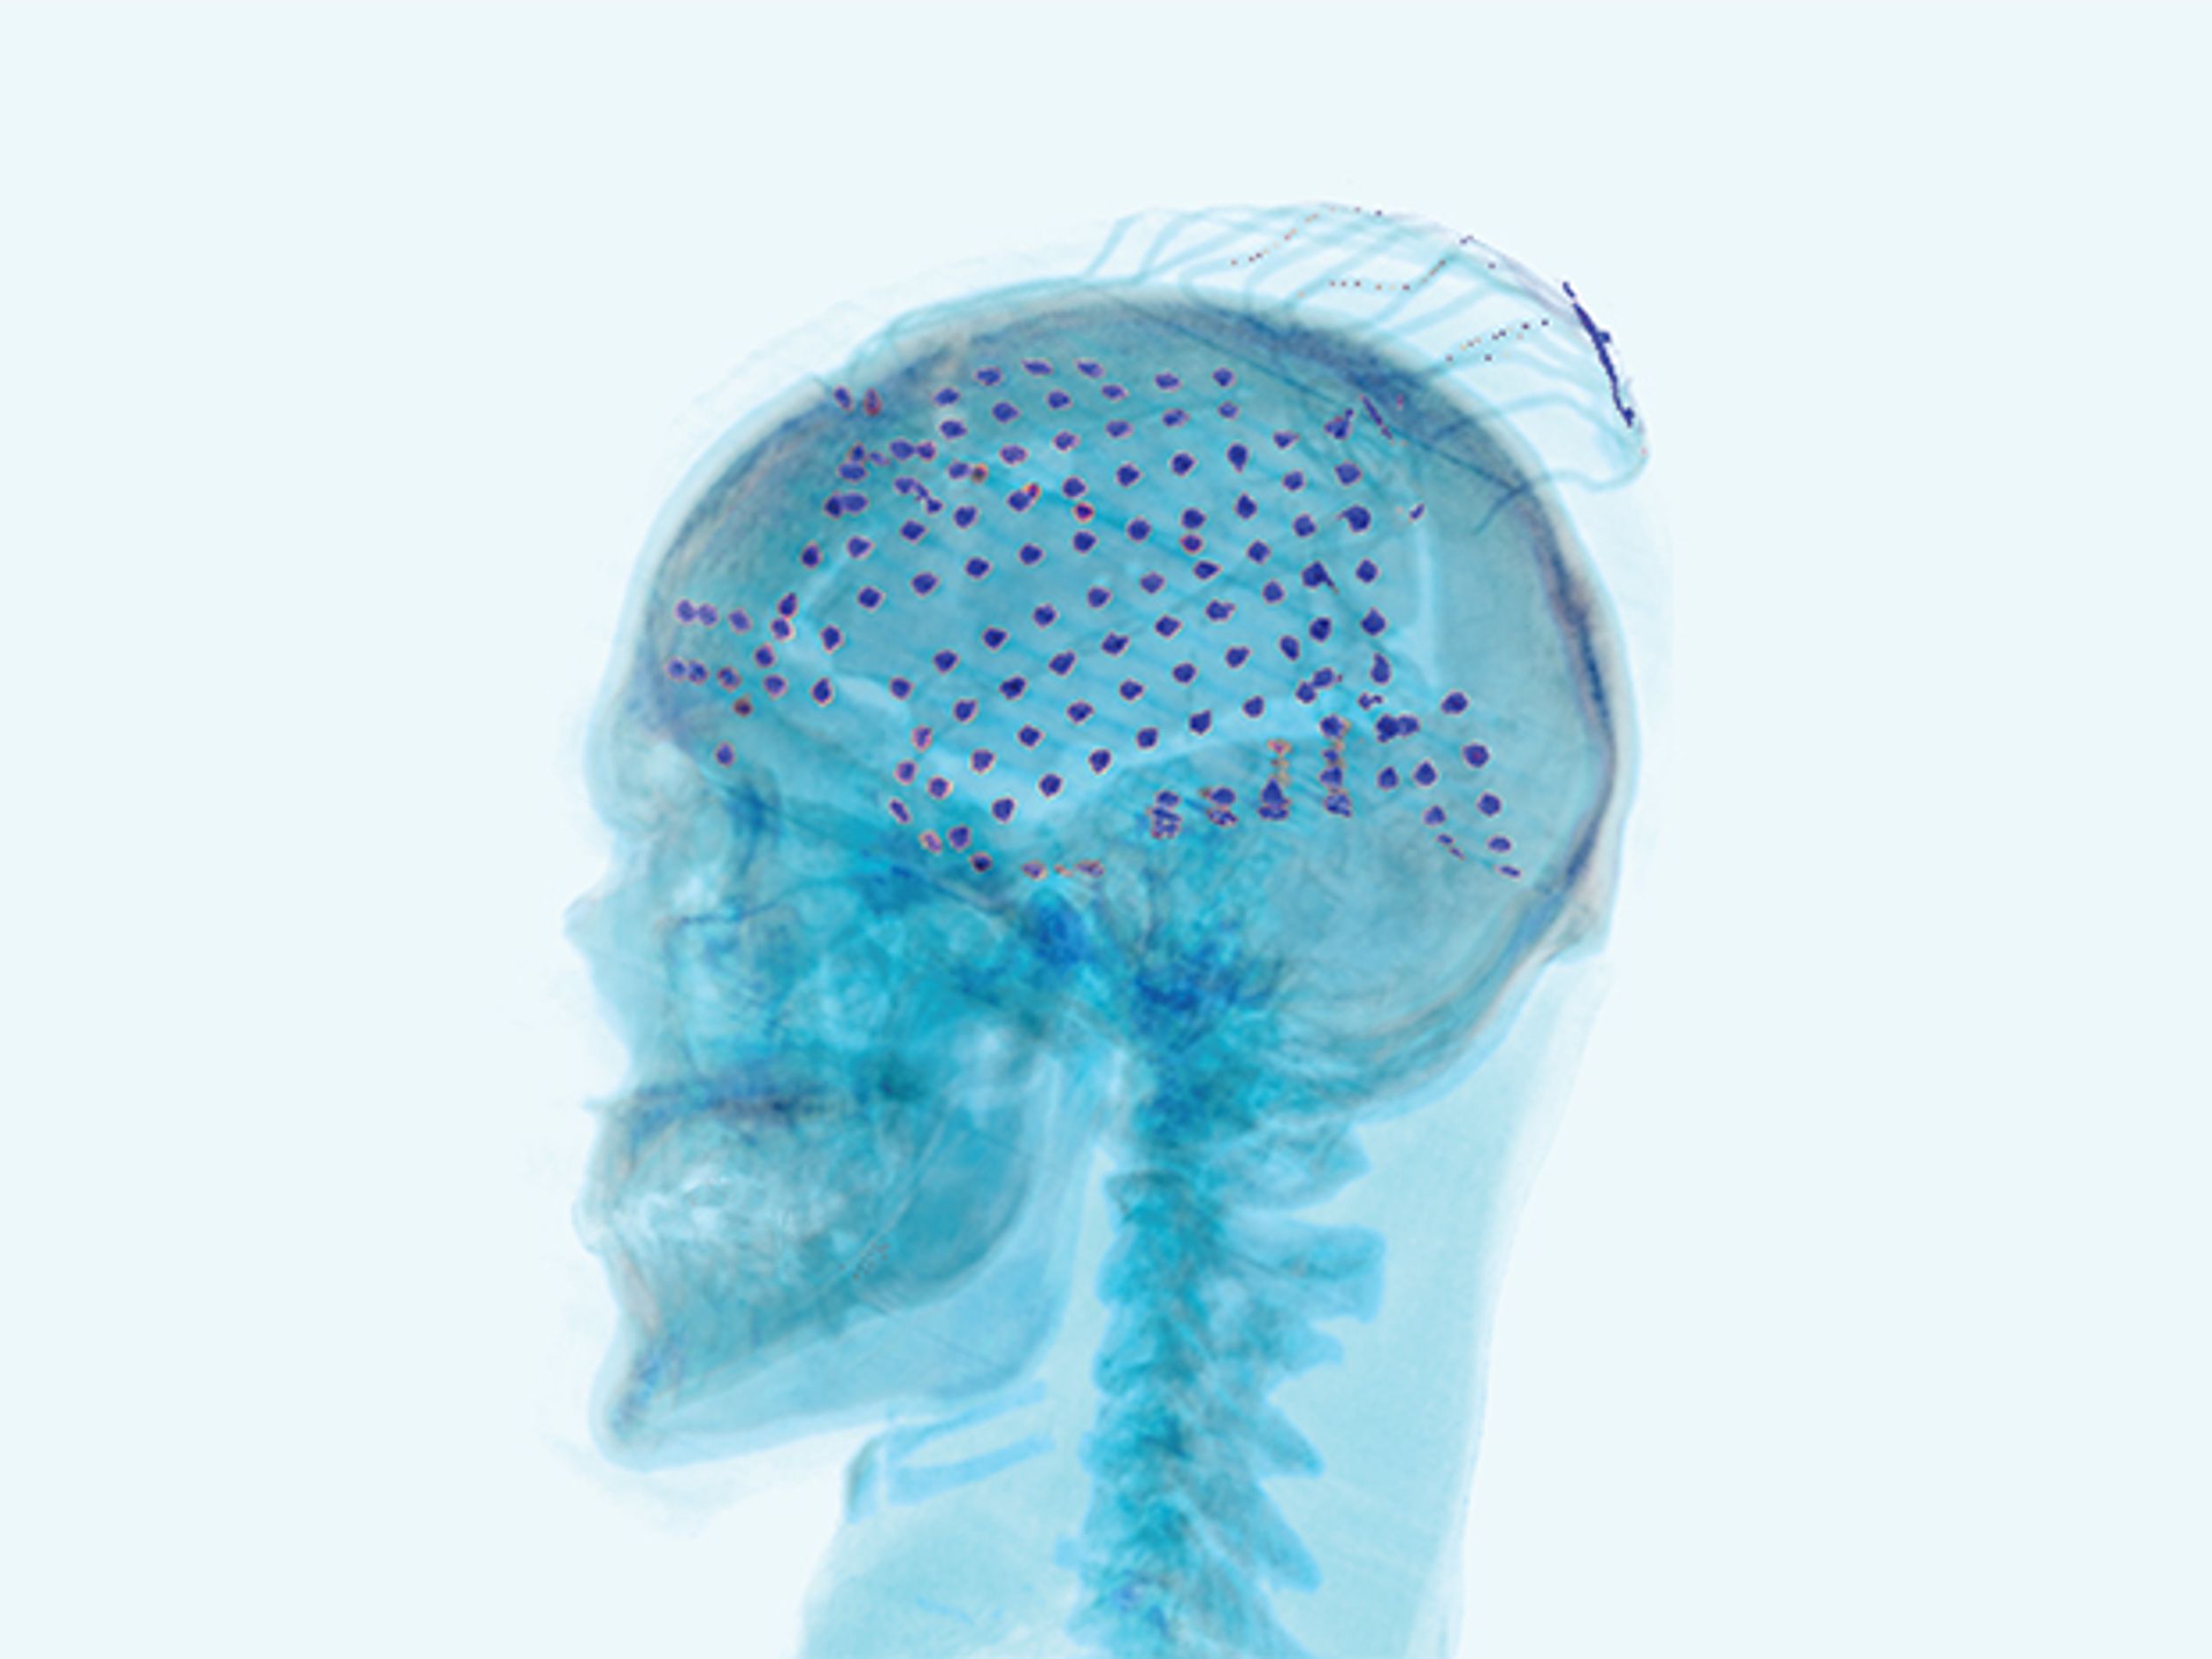 How to Catch Brain Waves in a Net